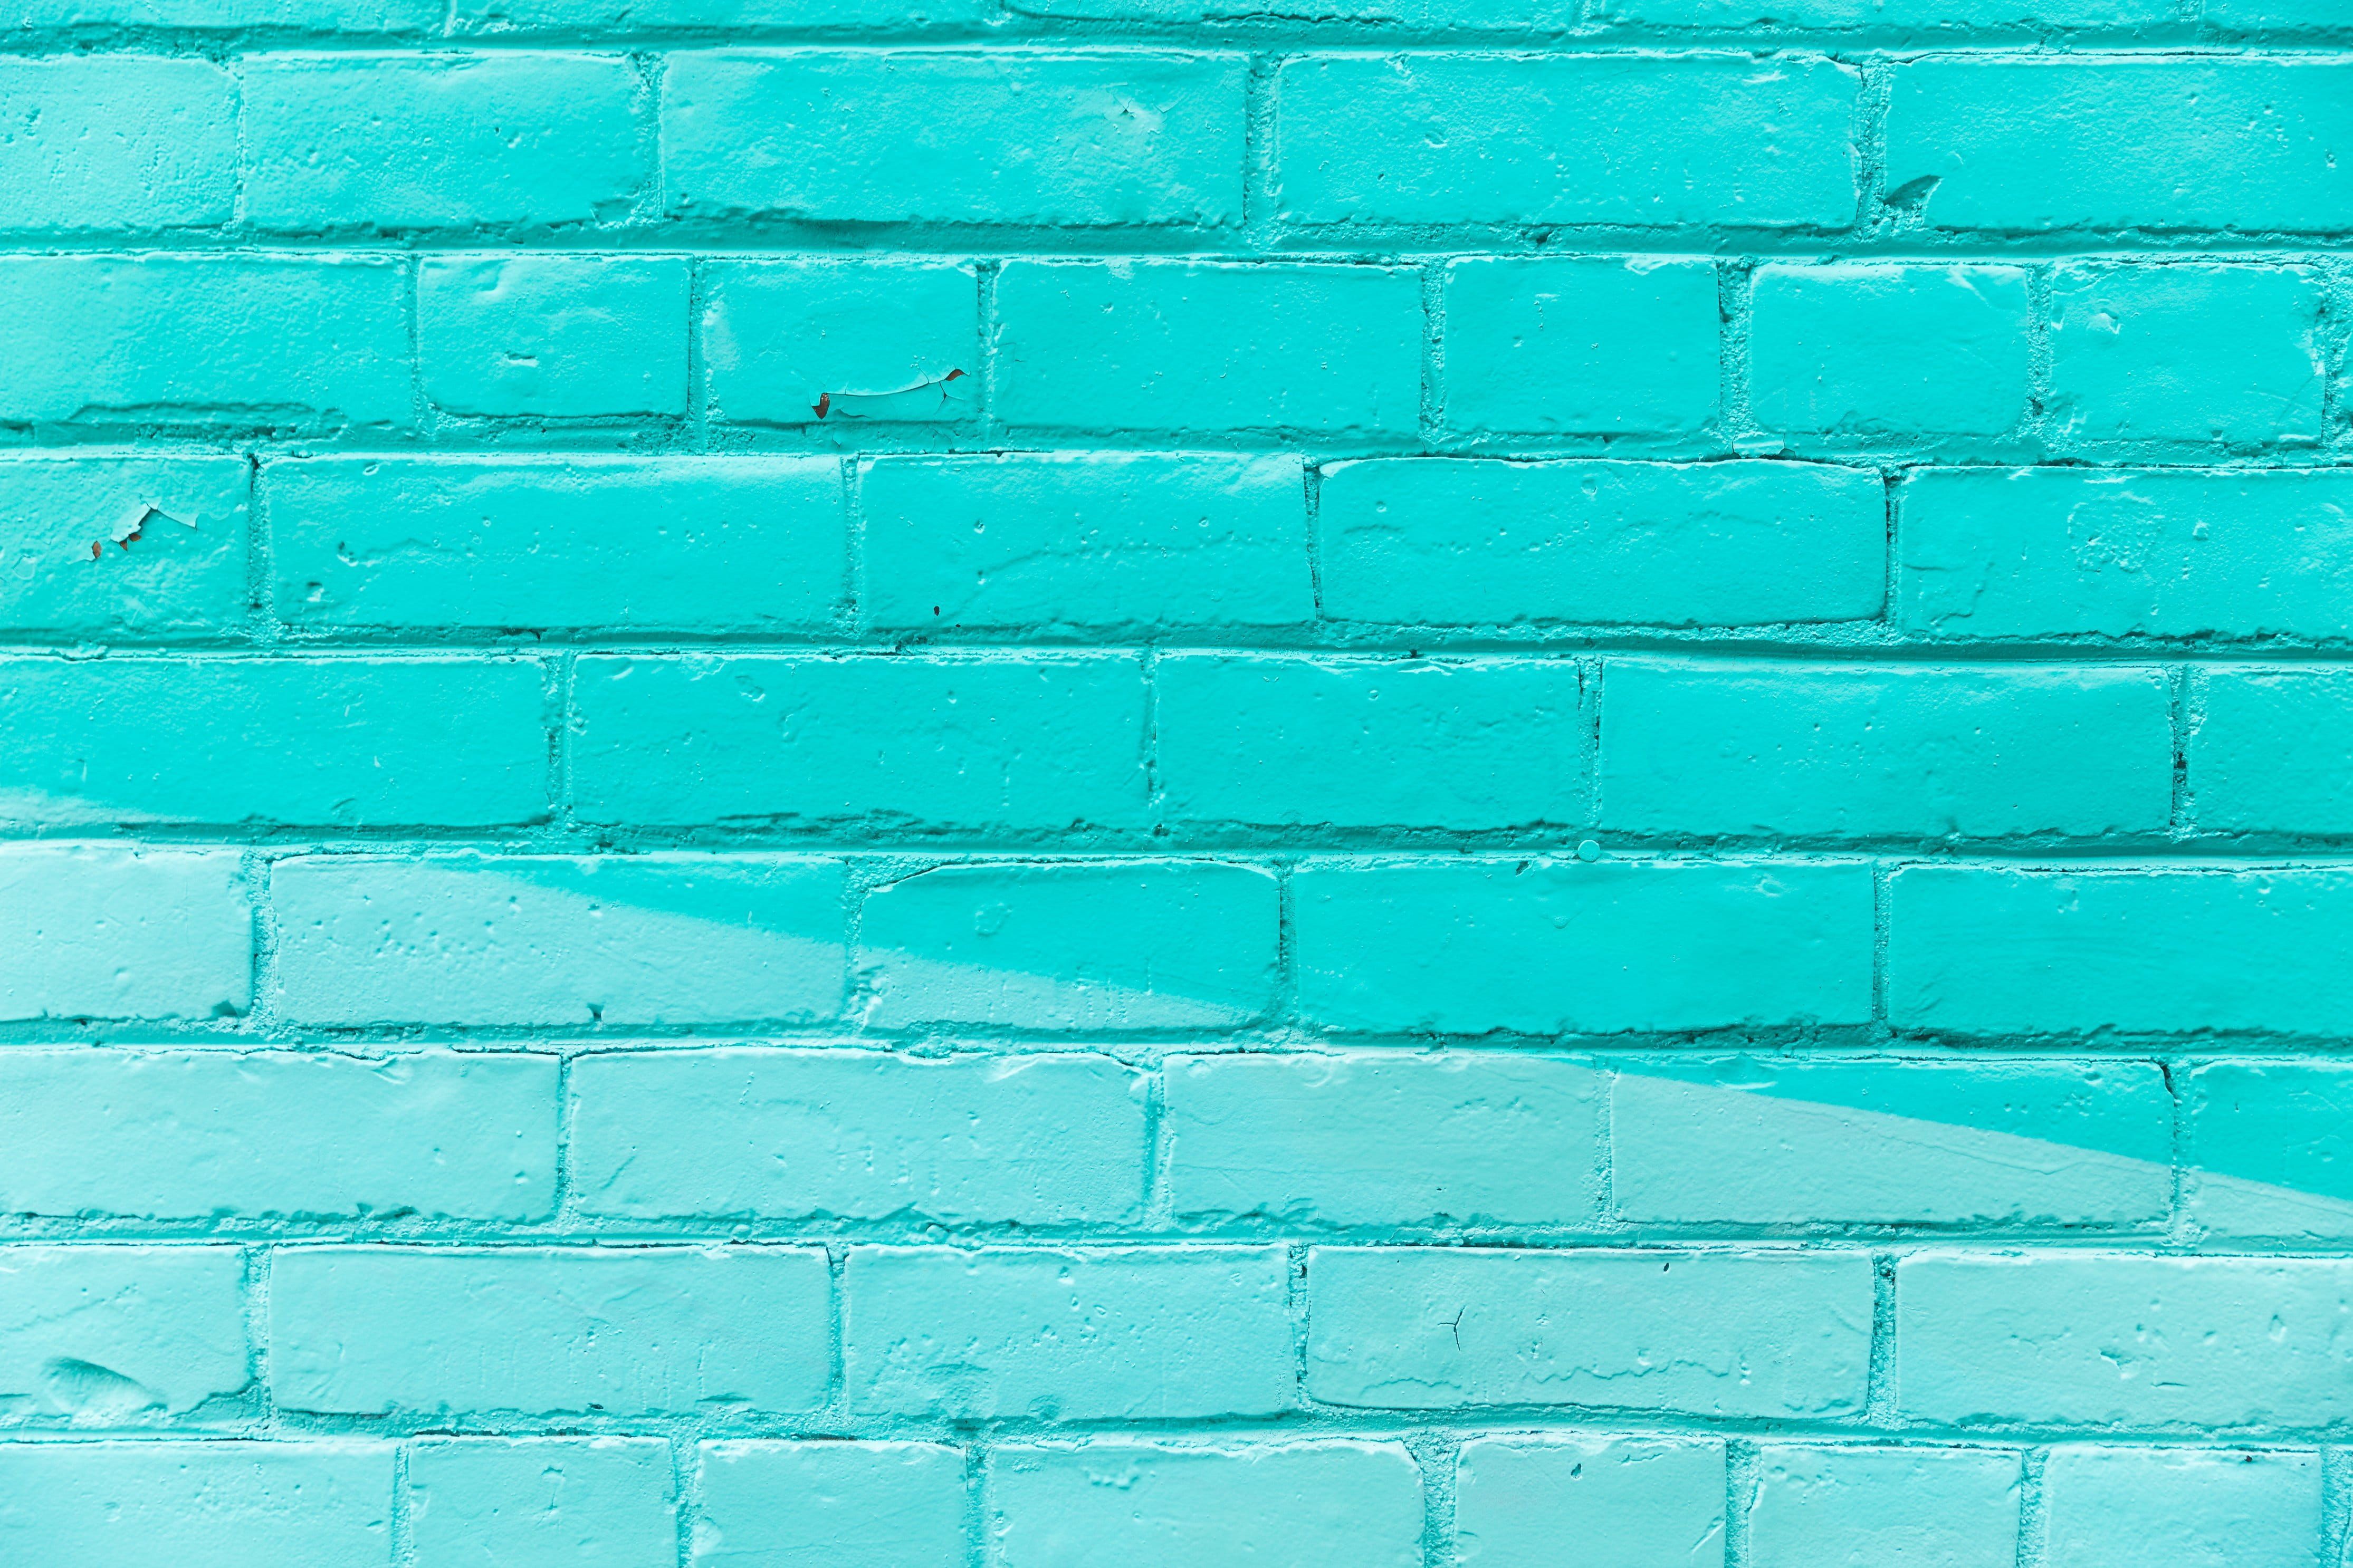 Turquoise Brick Wall Texture Photo #Background #Textures #Walls K # wallpaper #hdwallpaper #deskto. Brick wall texture, Free texture background, Textured walls